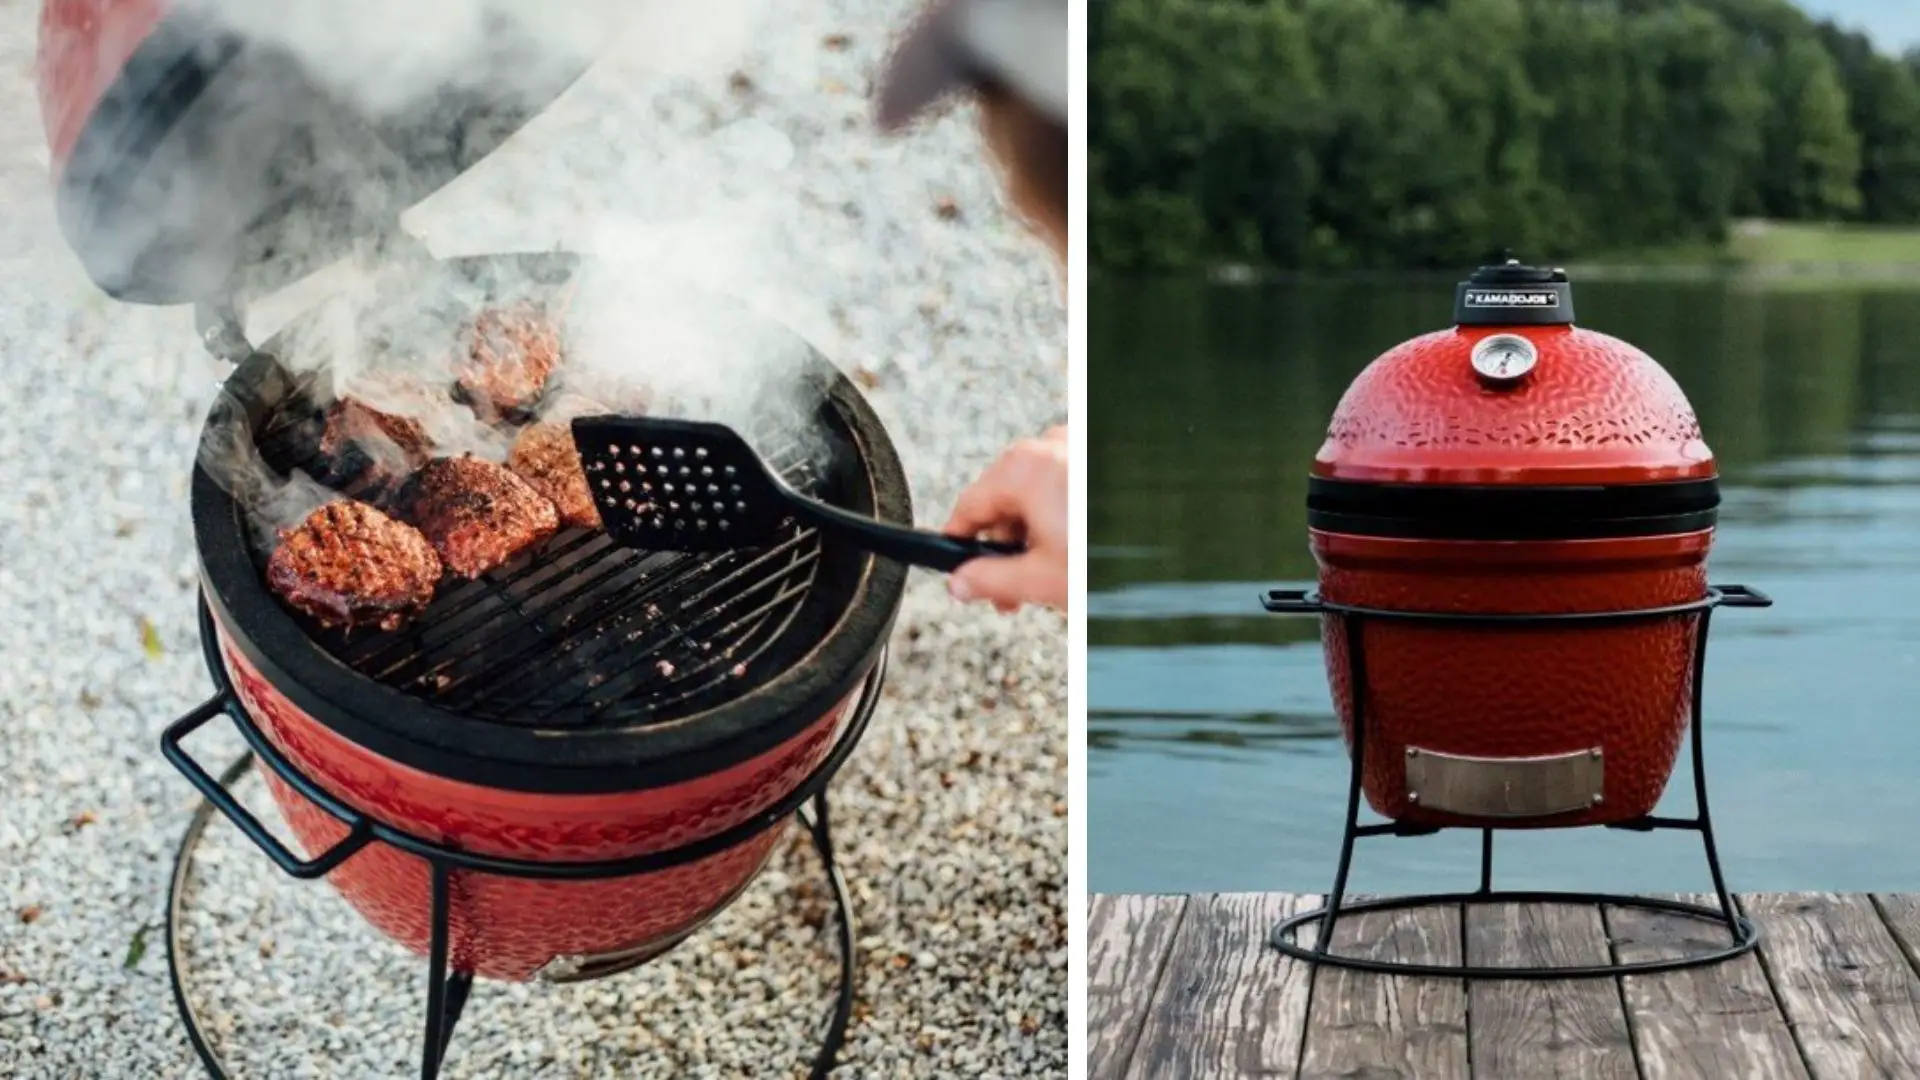 Kamado Joe Jr. Charcoal Grill on Sale Now at Walmart for Clearance ...